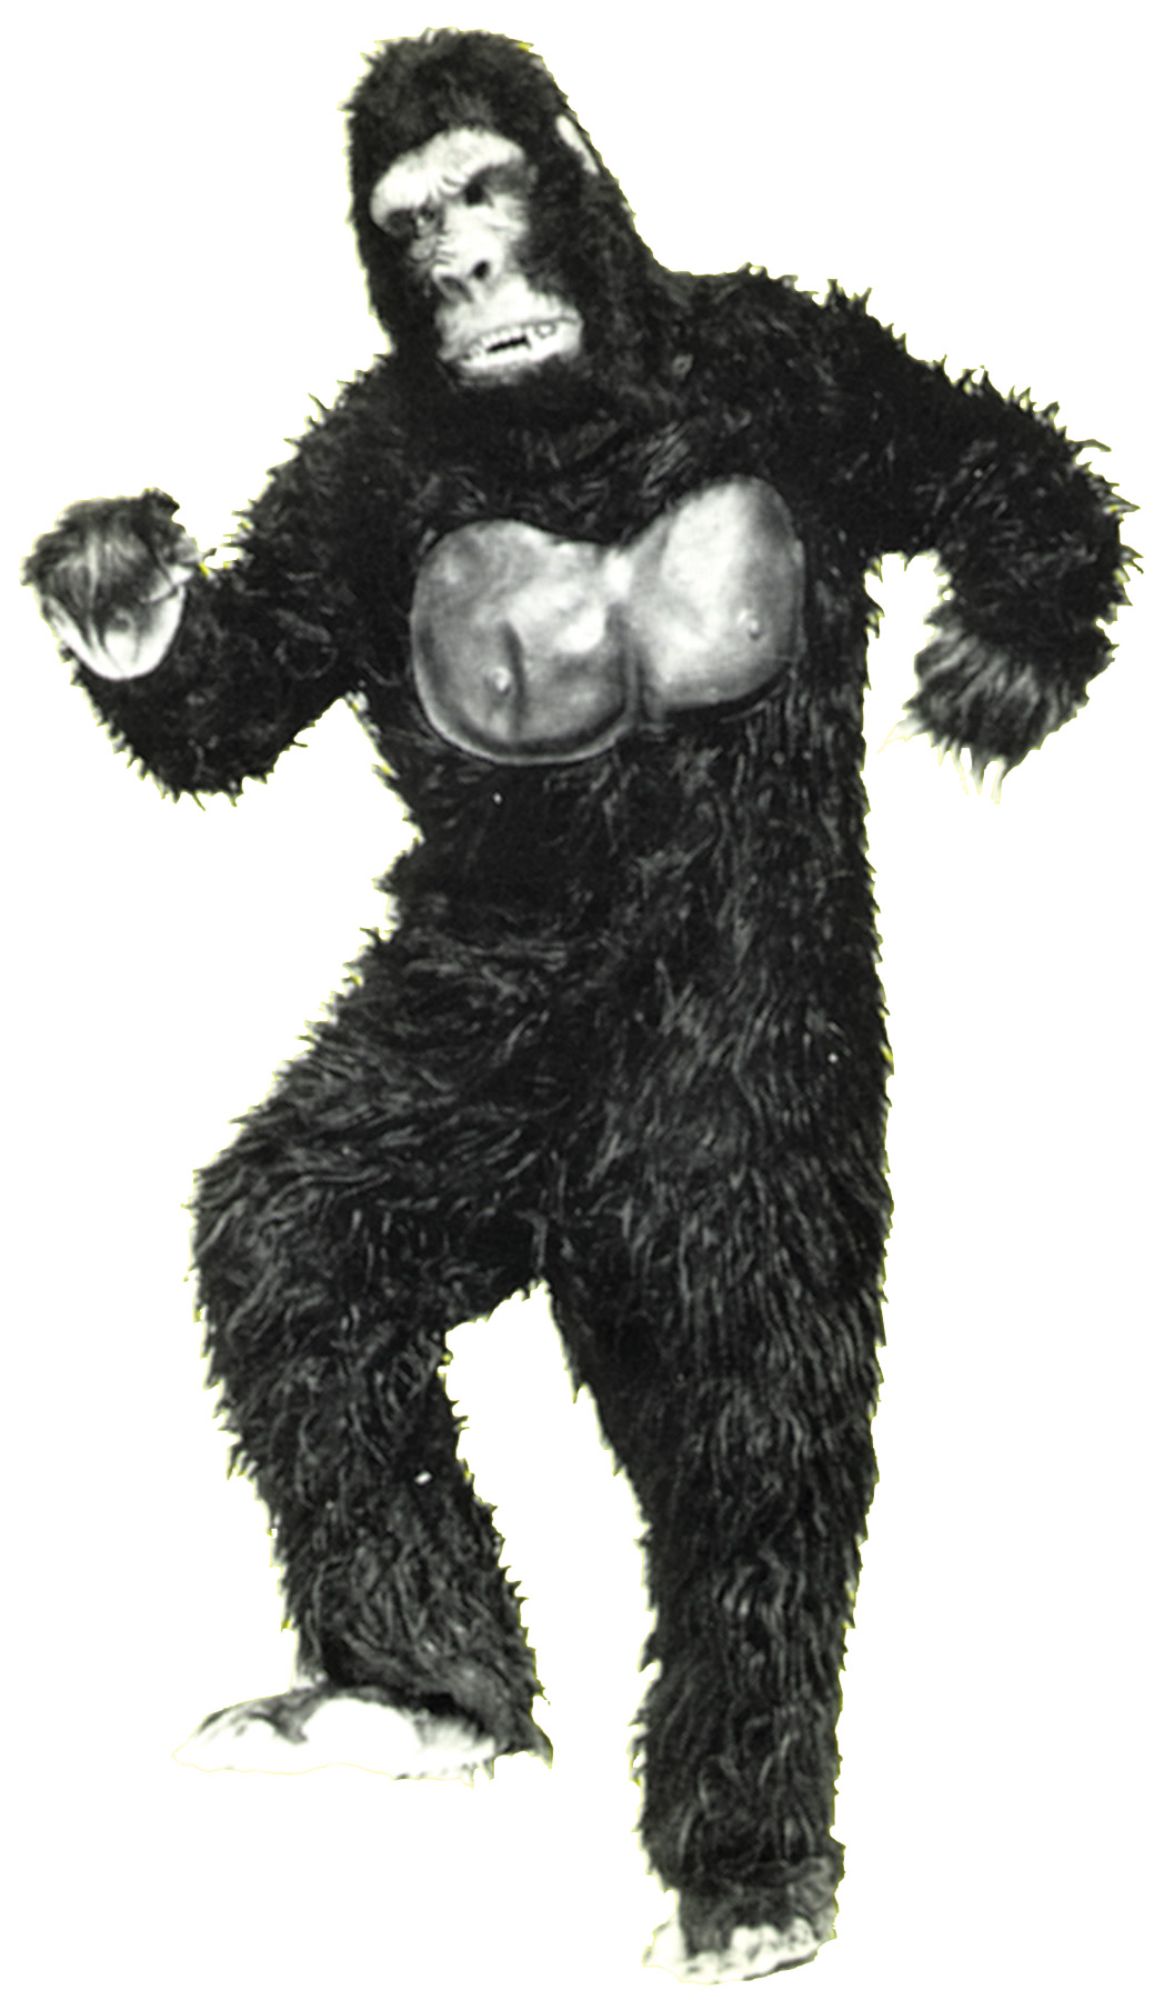 The Costume Center Black and Silver Gorilla Unisex Adult Halloween Costume - One Size